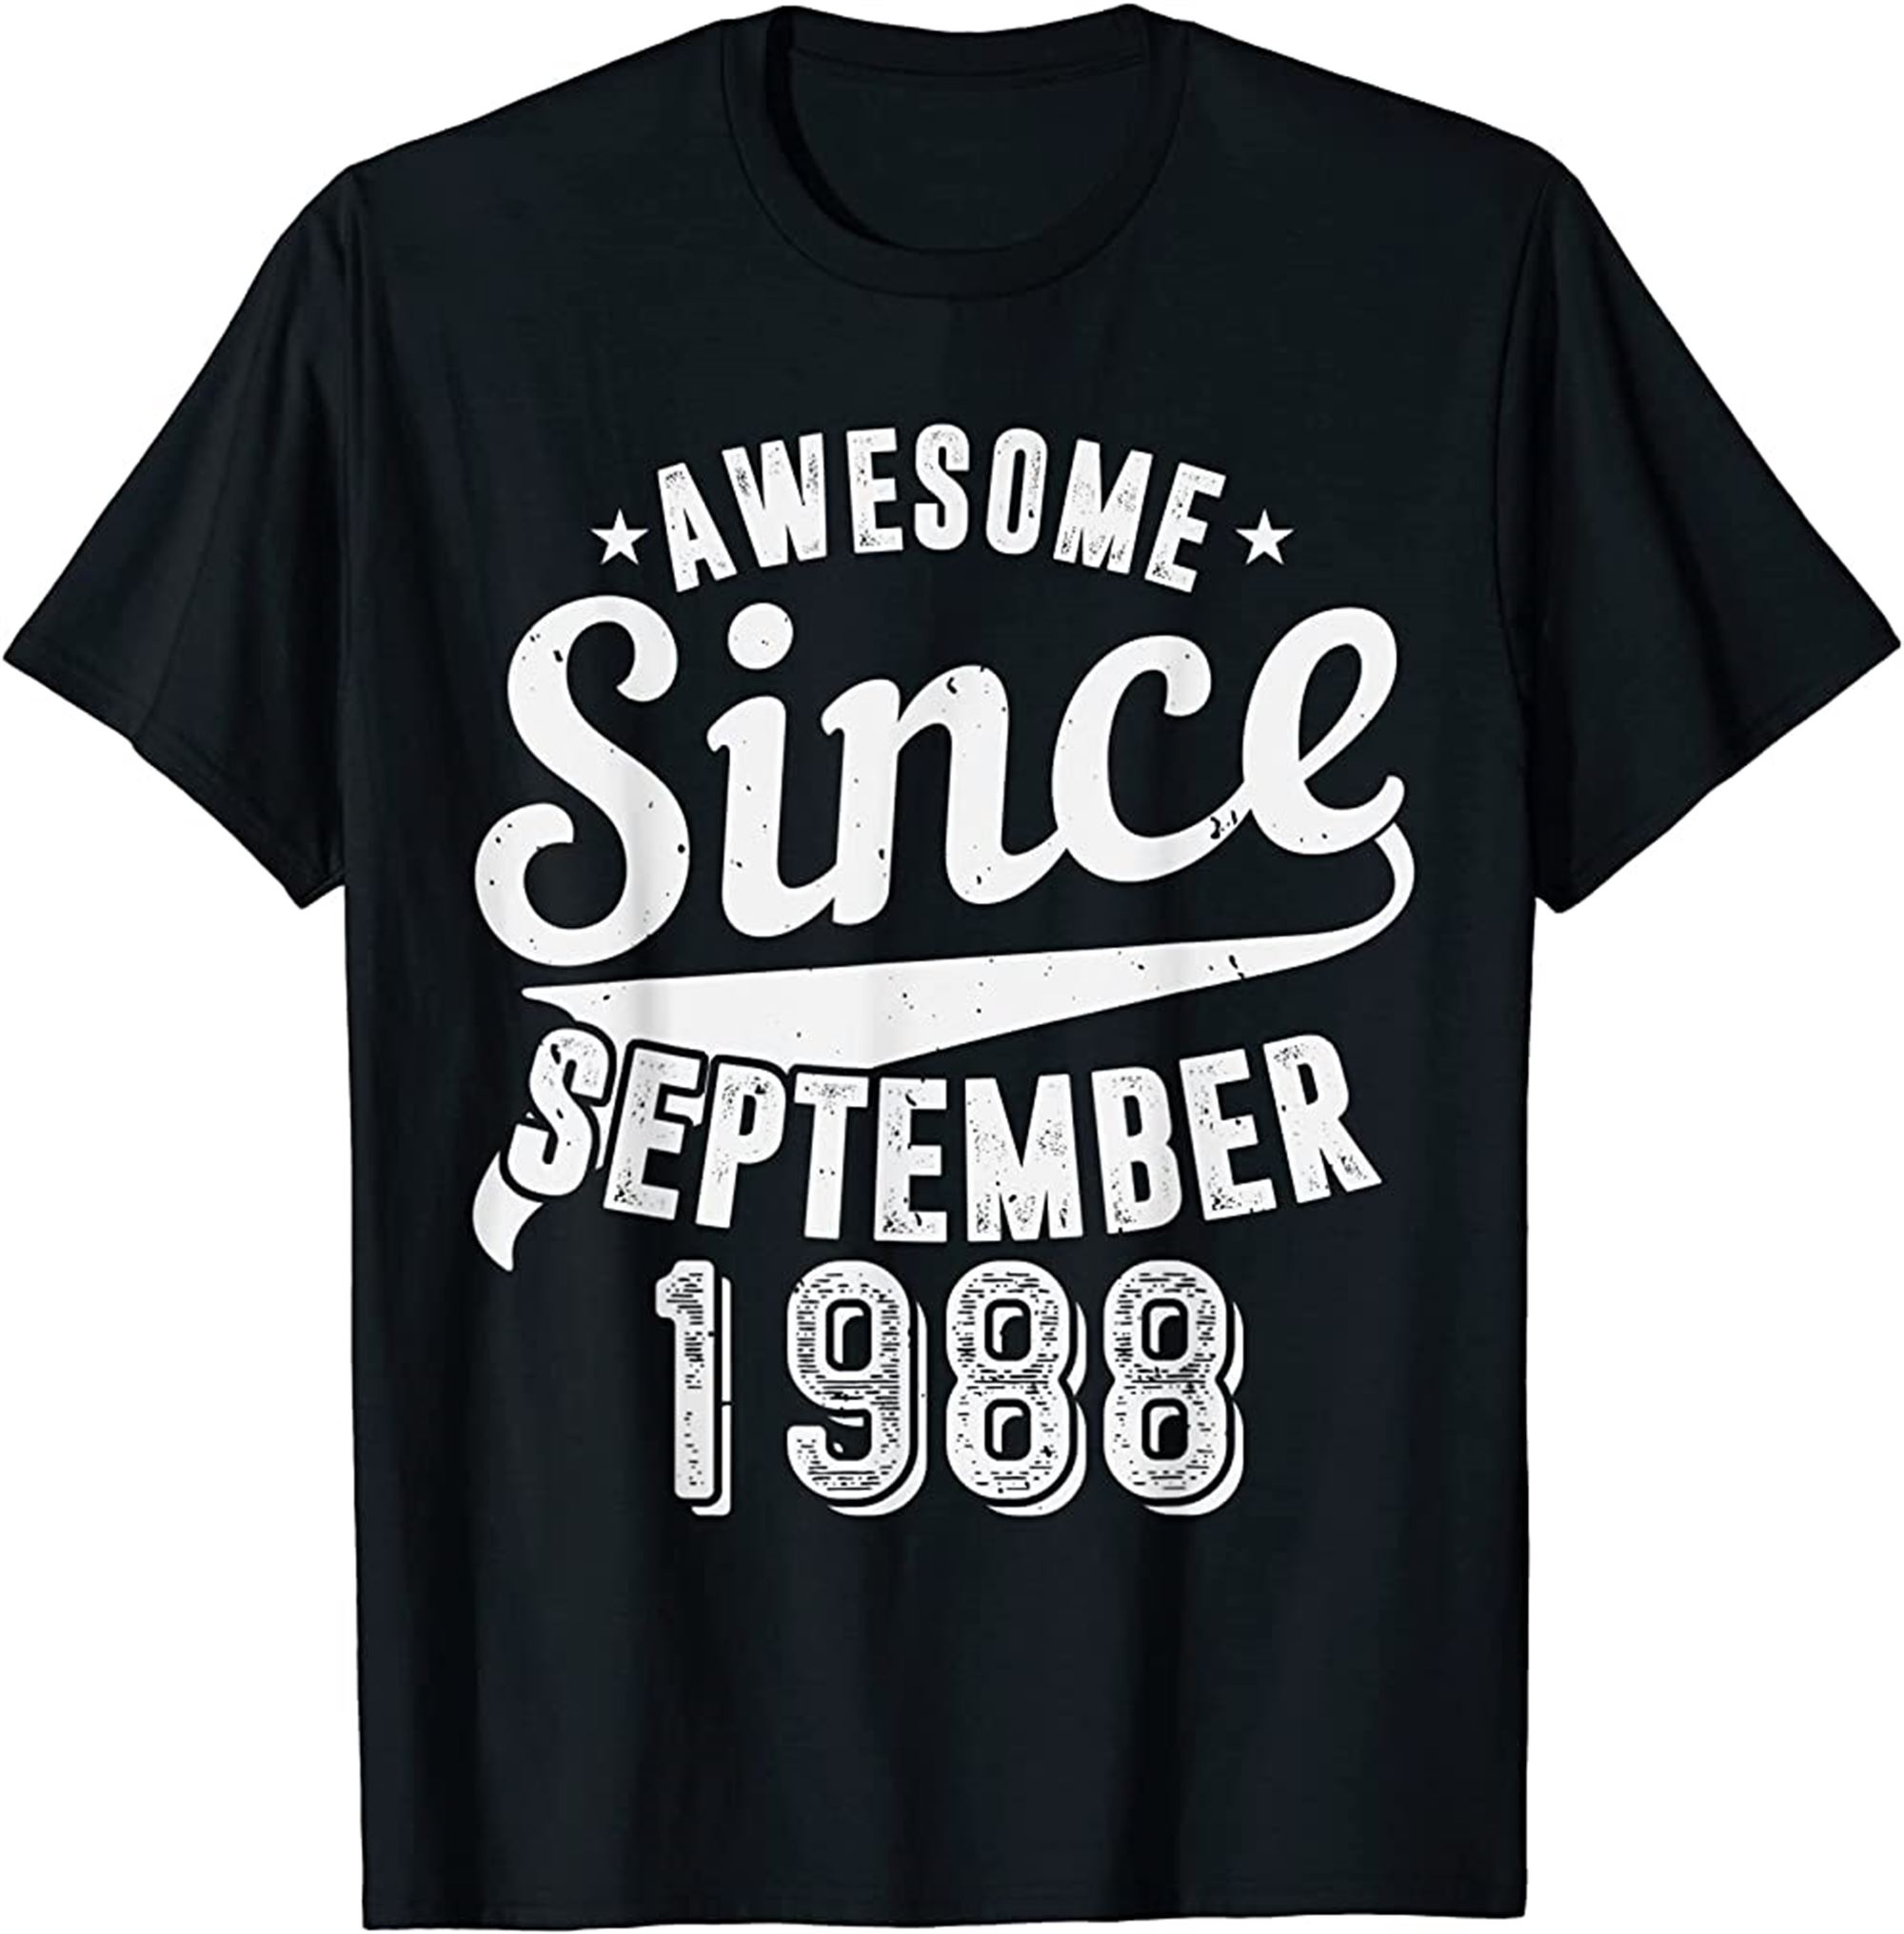 Vintage 1988 Awesome Since September Happy My 34th Birthday T-shirt Full Size Up To 5xl